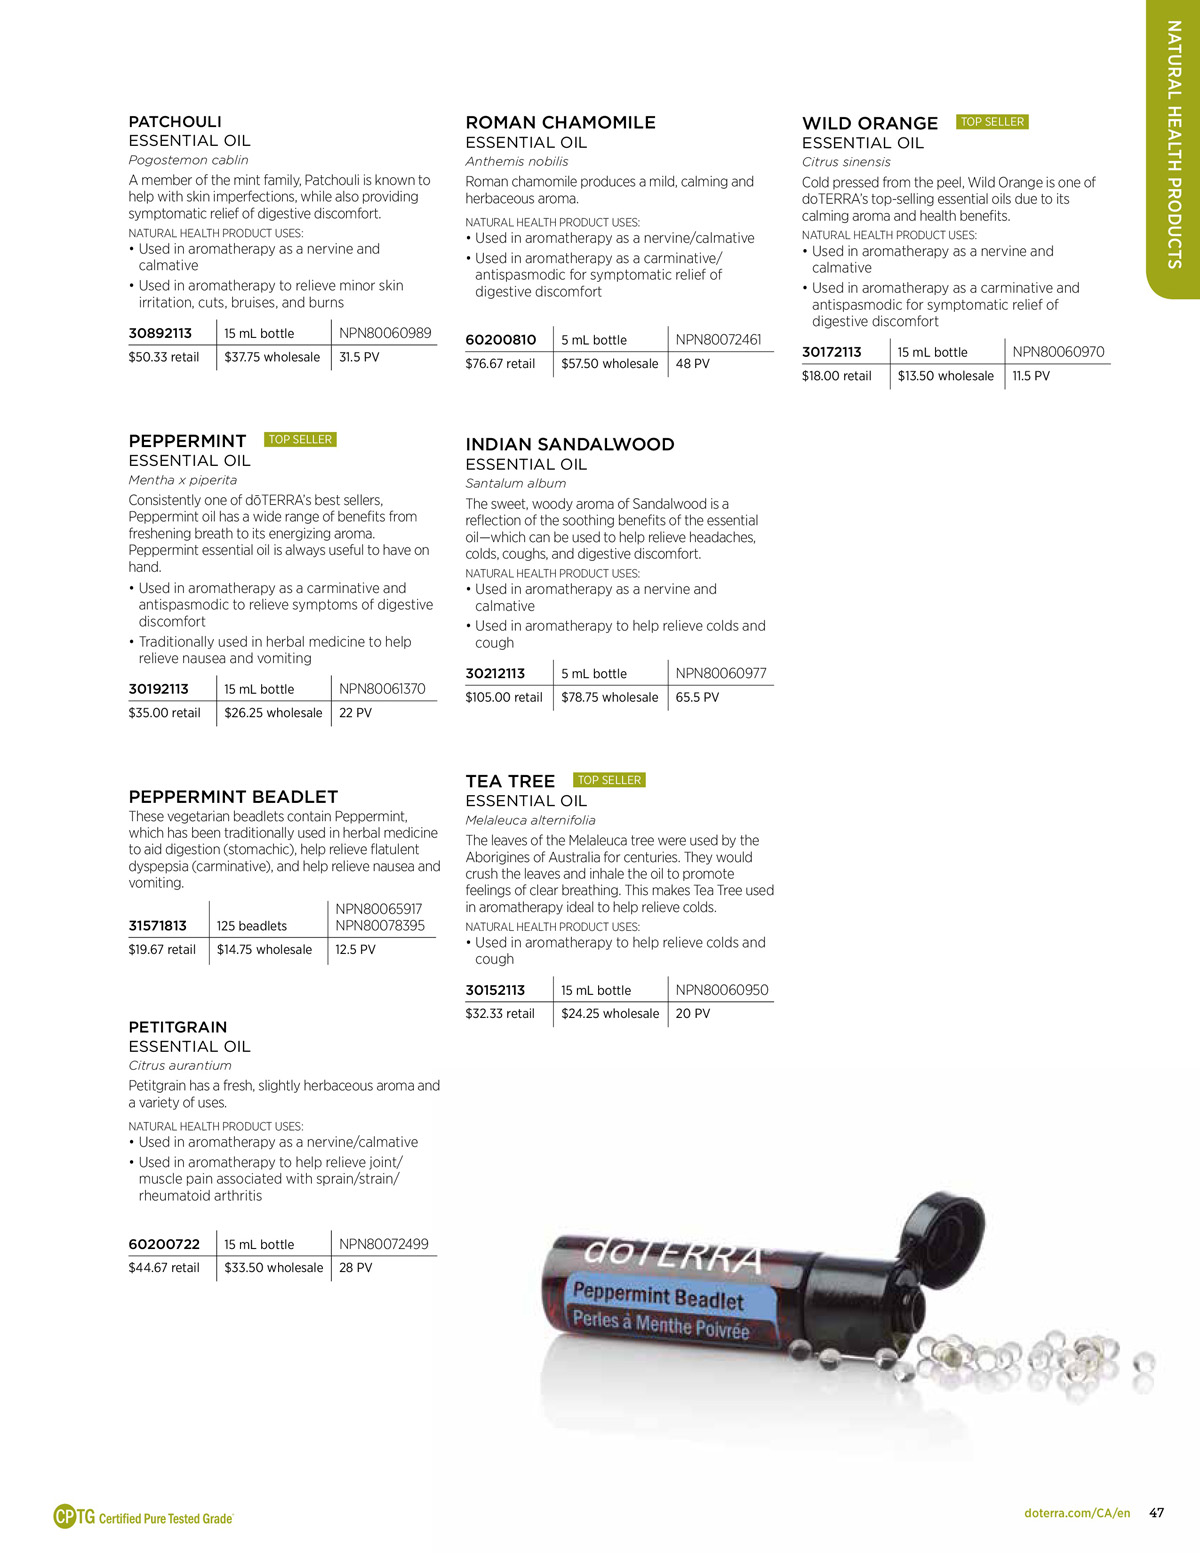 doterra product guide page 47